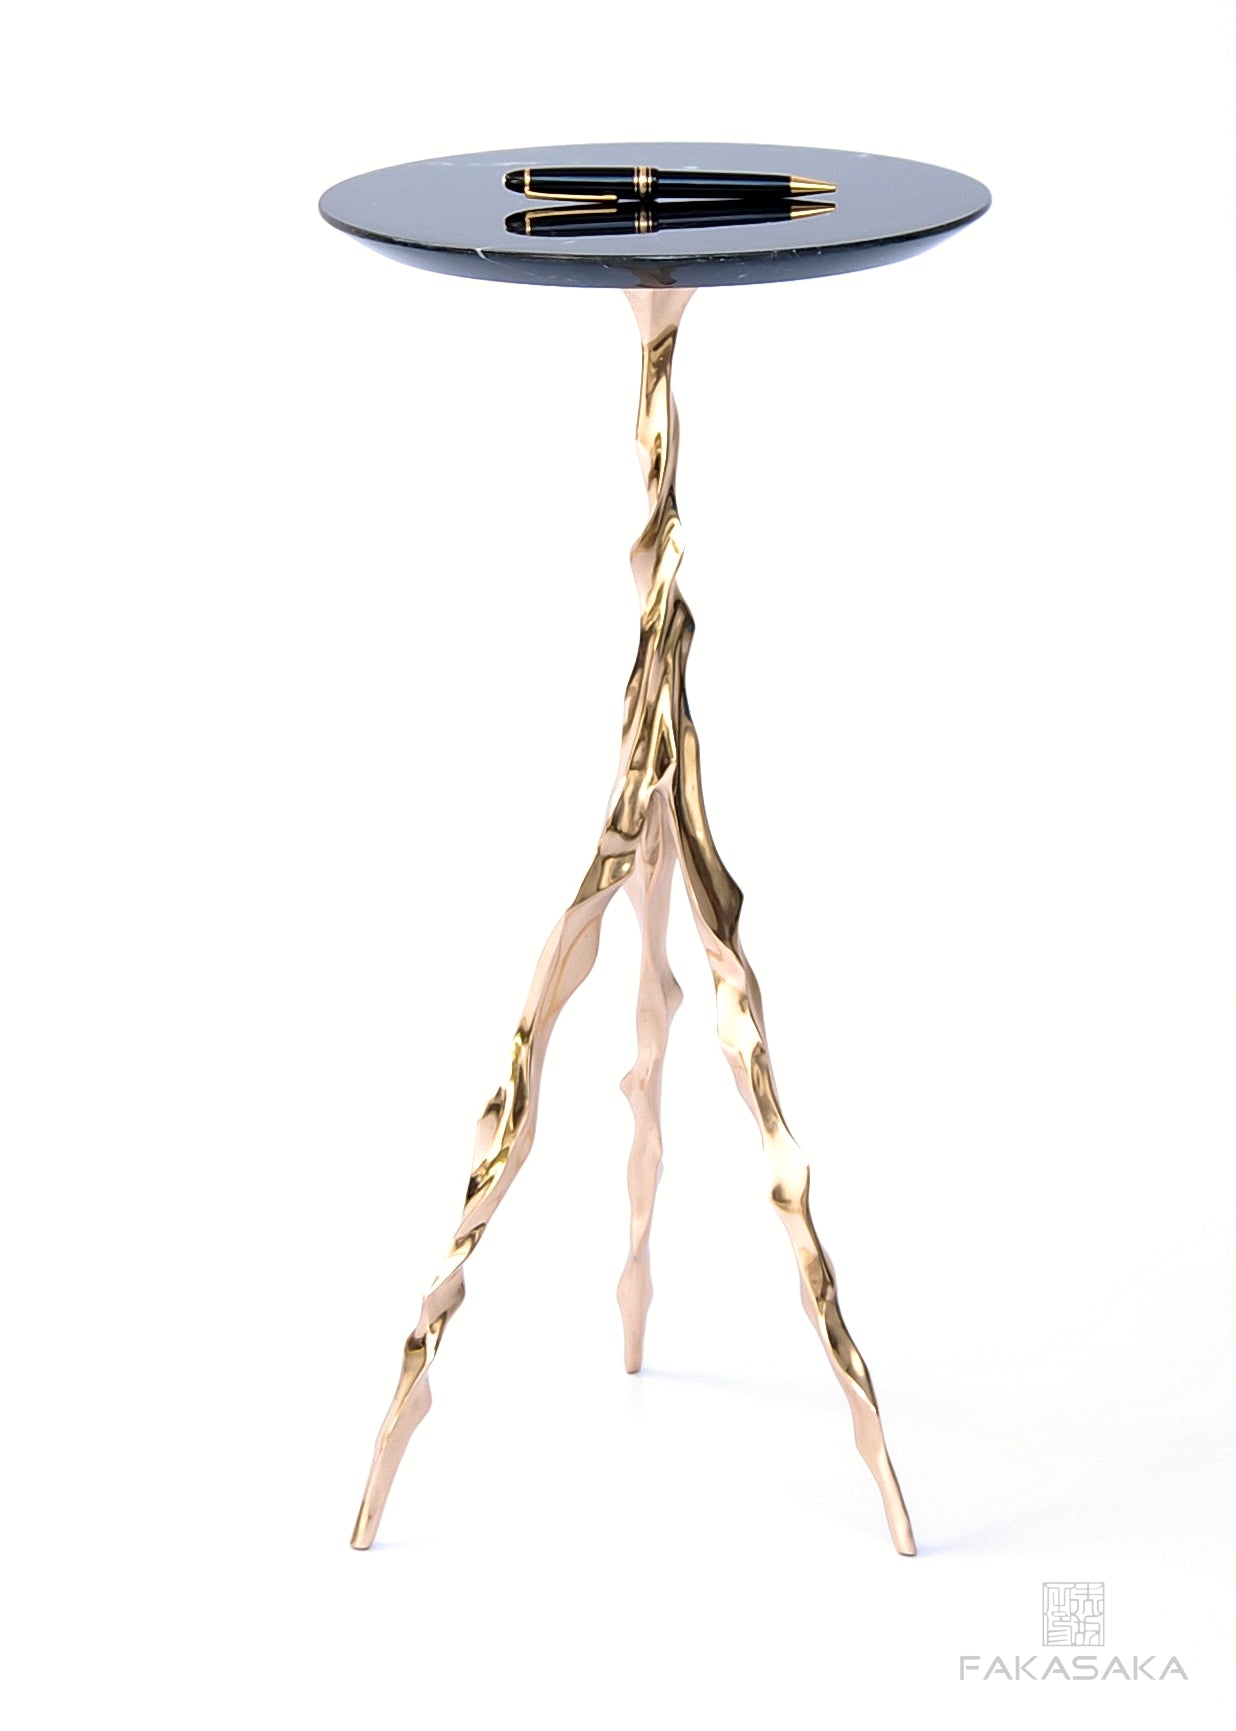 ETTA DRINK TABLE<br><br>NERO MARQUINA MARBLE<br>POLISHED BRONZE